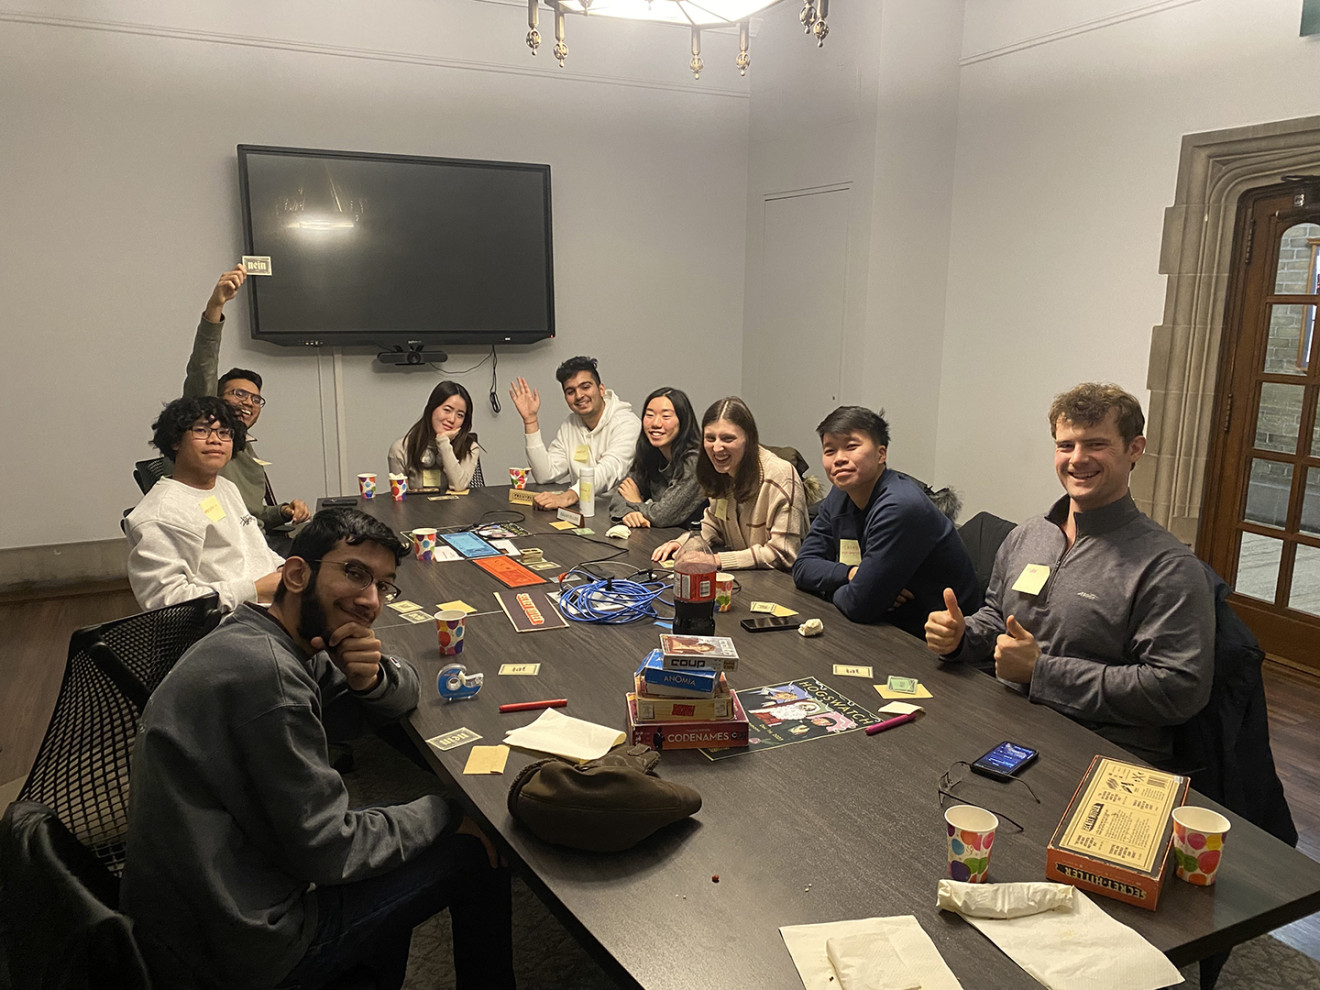 A group of university students playing board games.